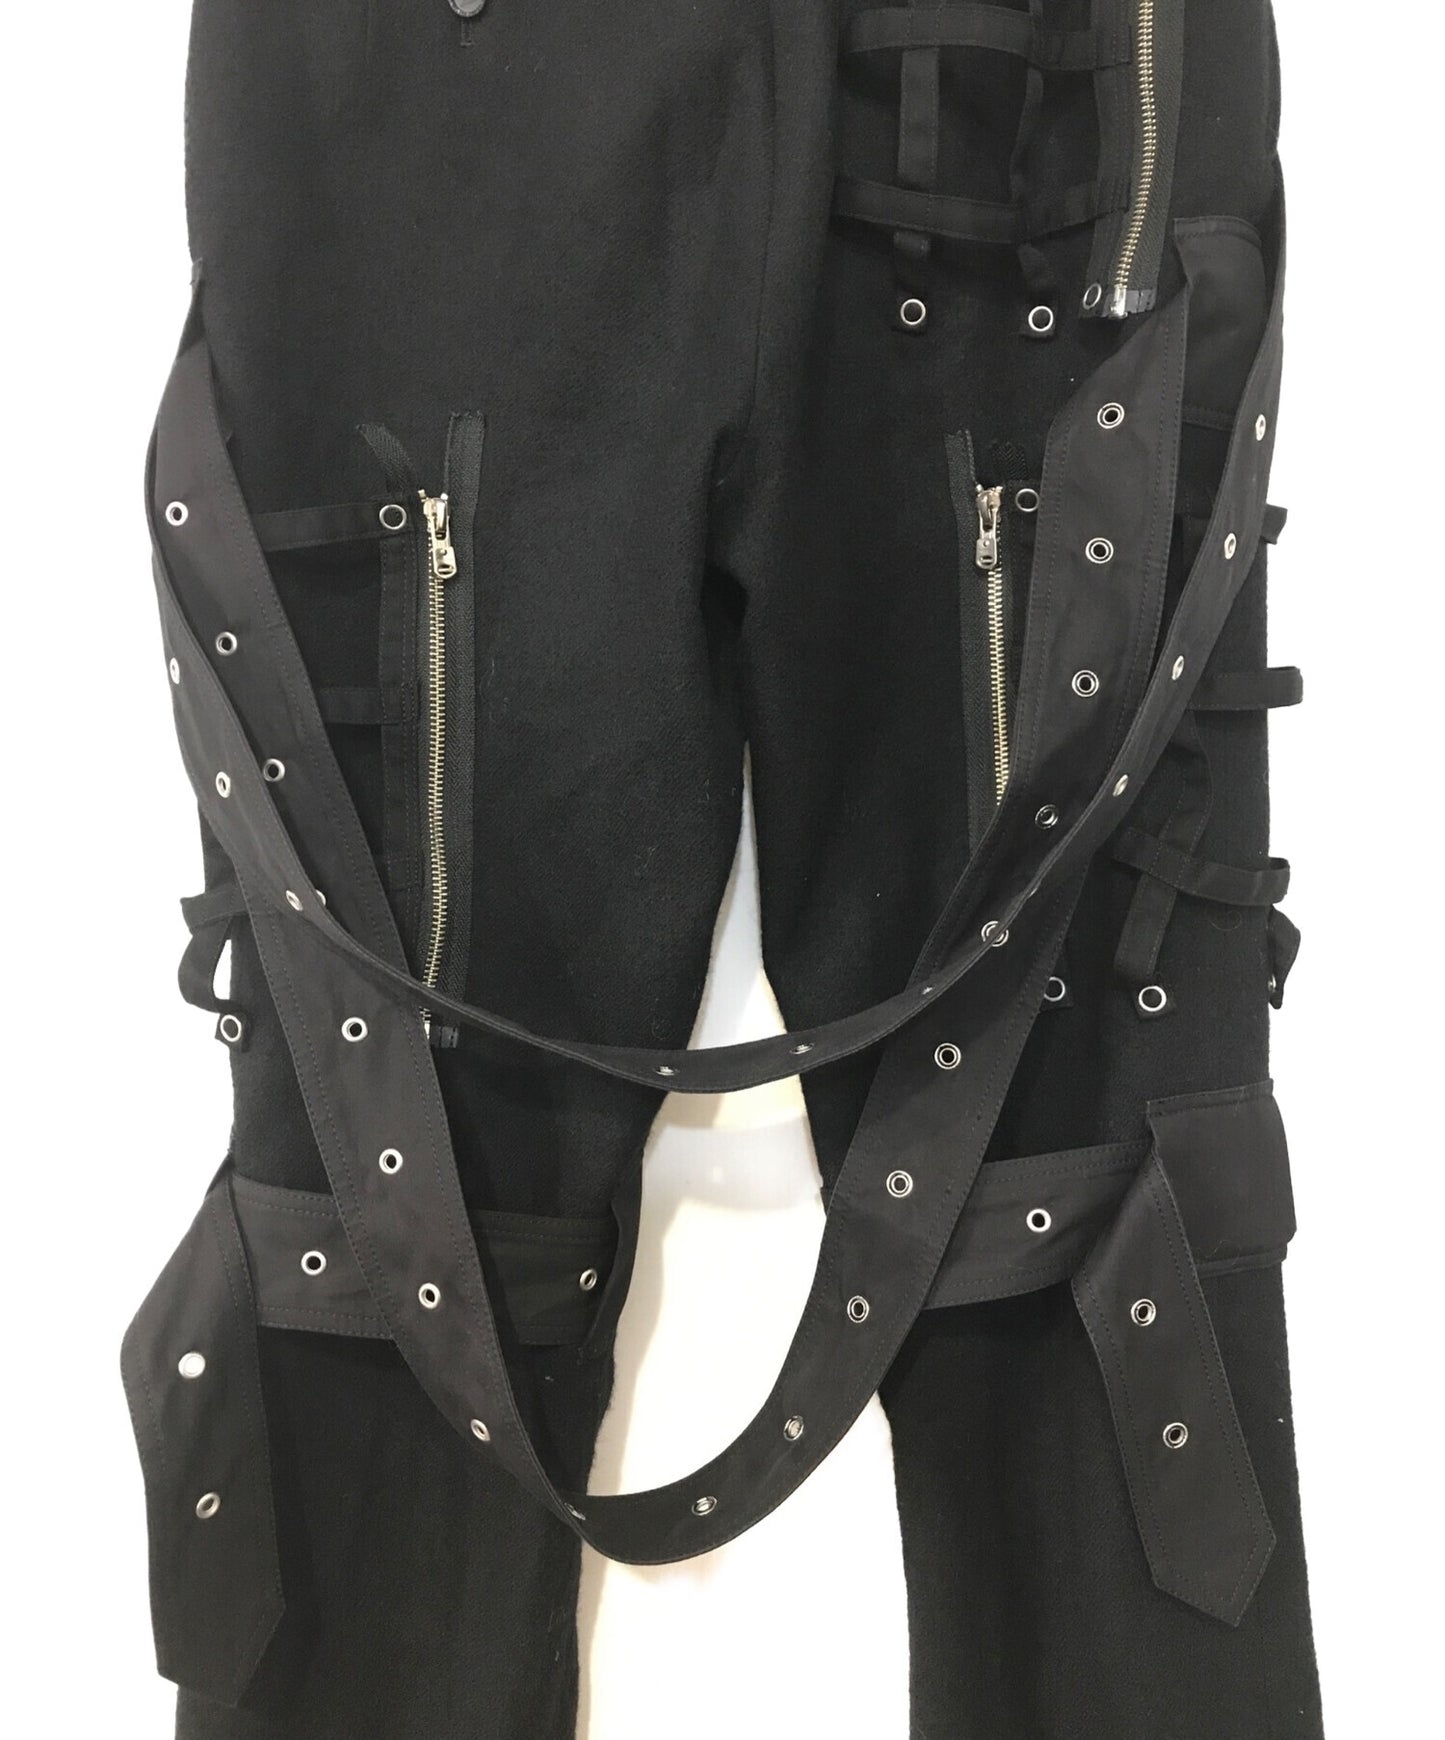 [Pre-owned] TAKAHIROMIYASHITA TheSoloIst. tight-fitting women's pants with elastic or drawstring tie 0001AW21